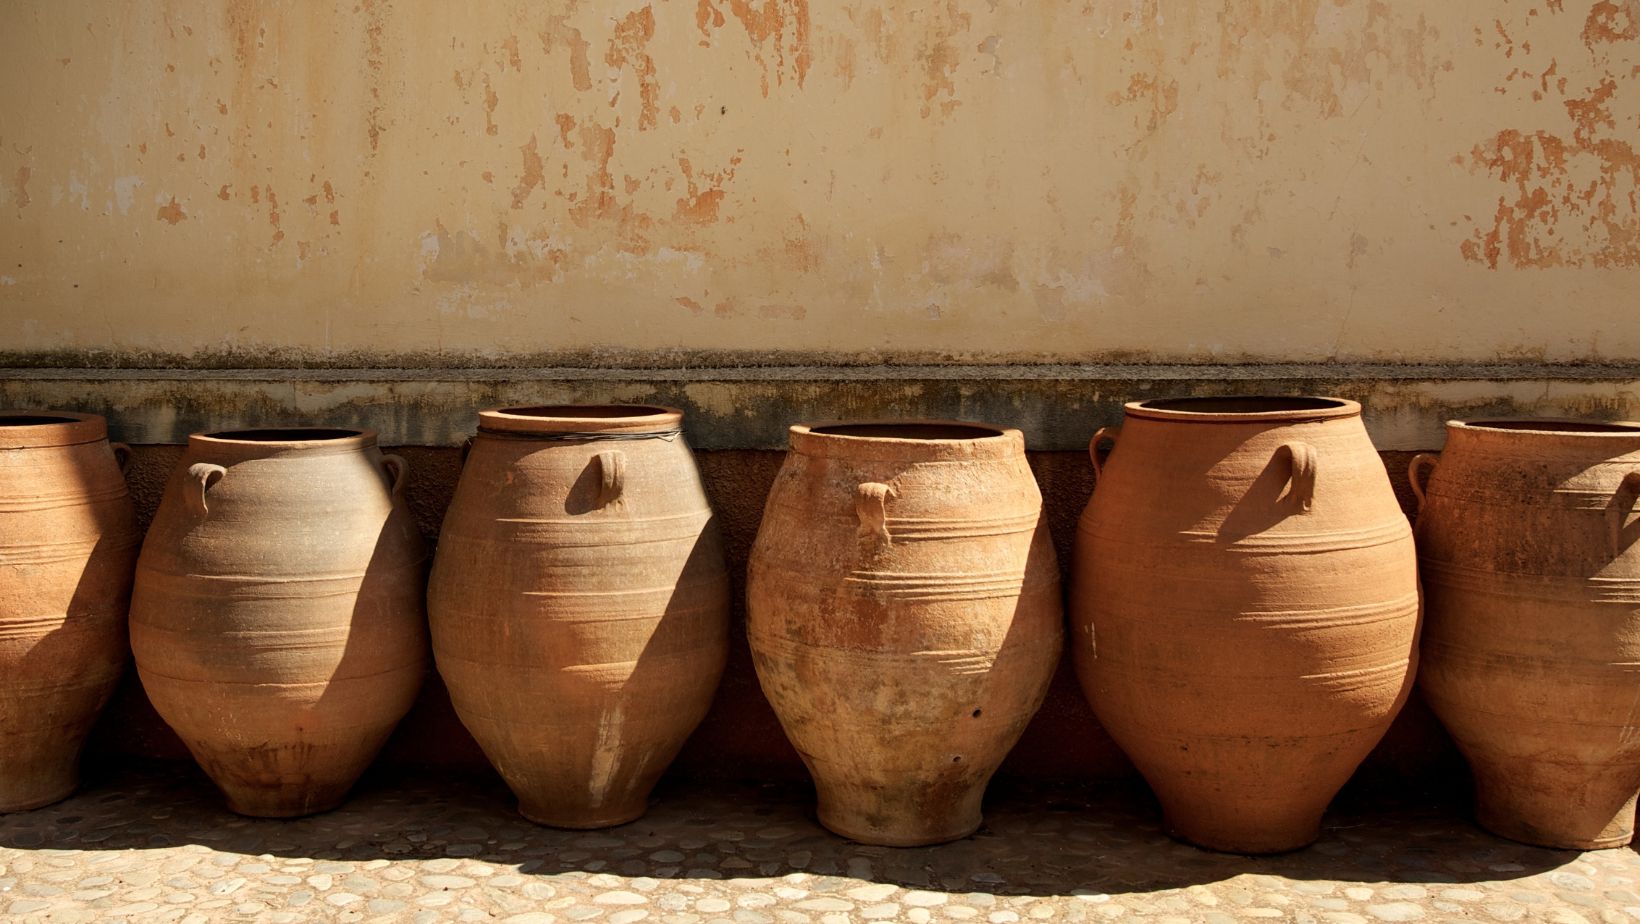 How To Make Clay Pots For Survival